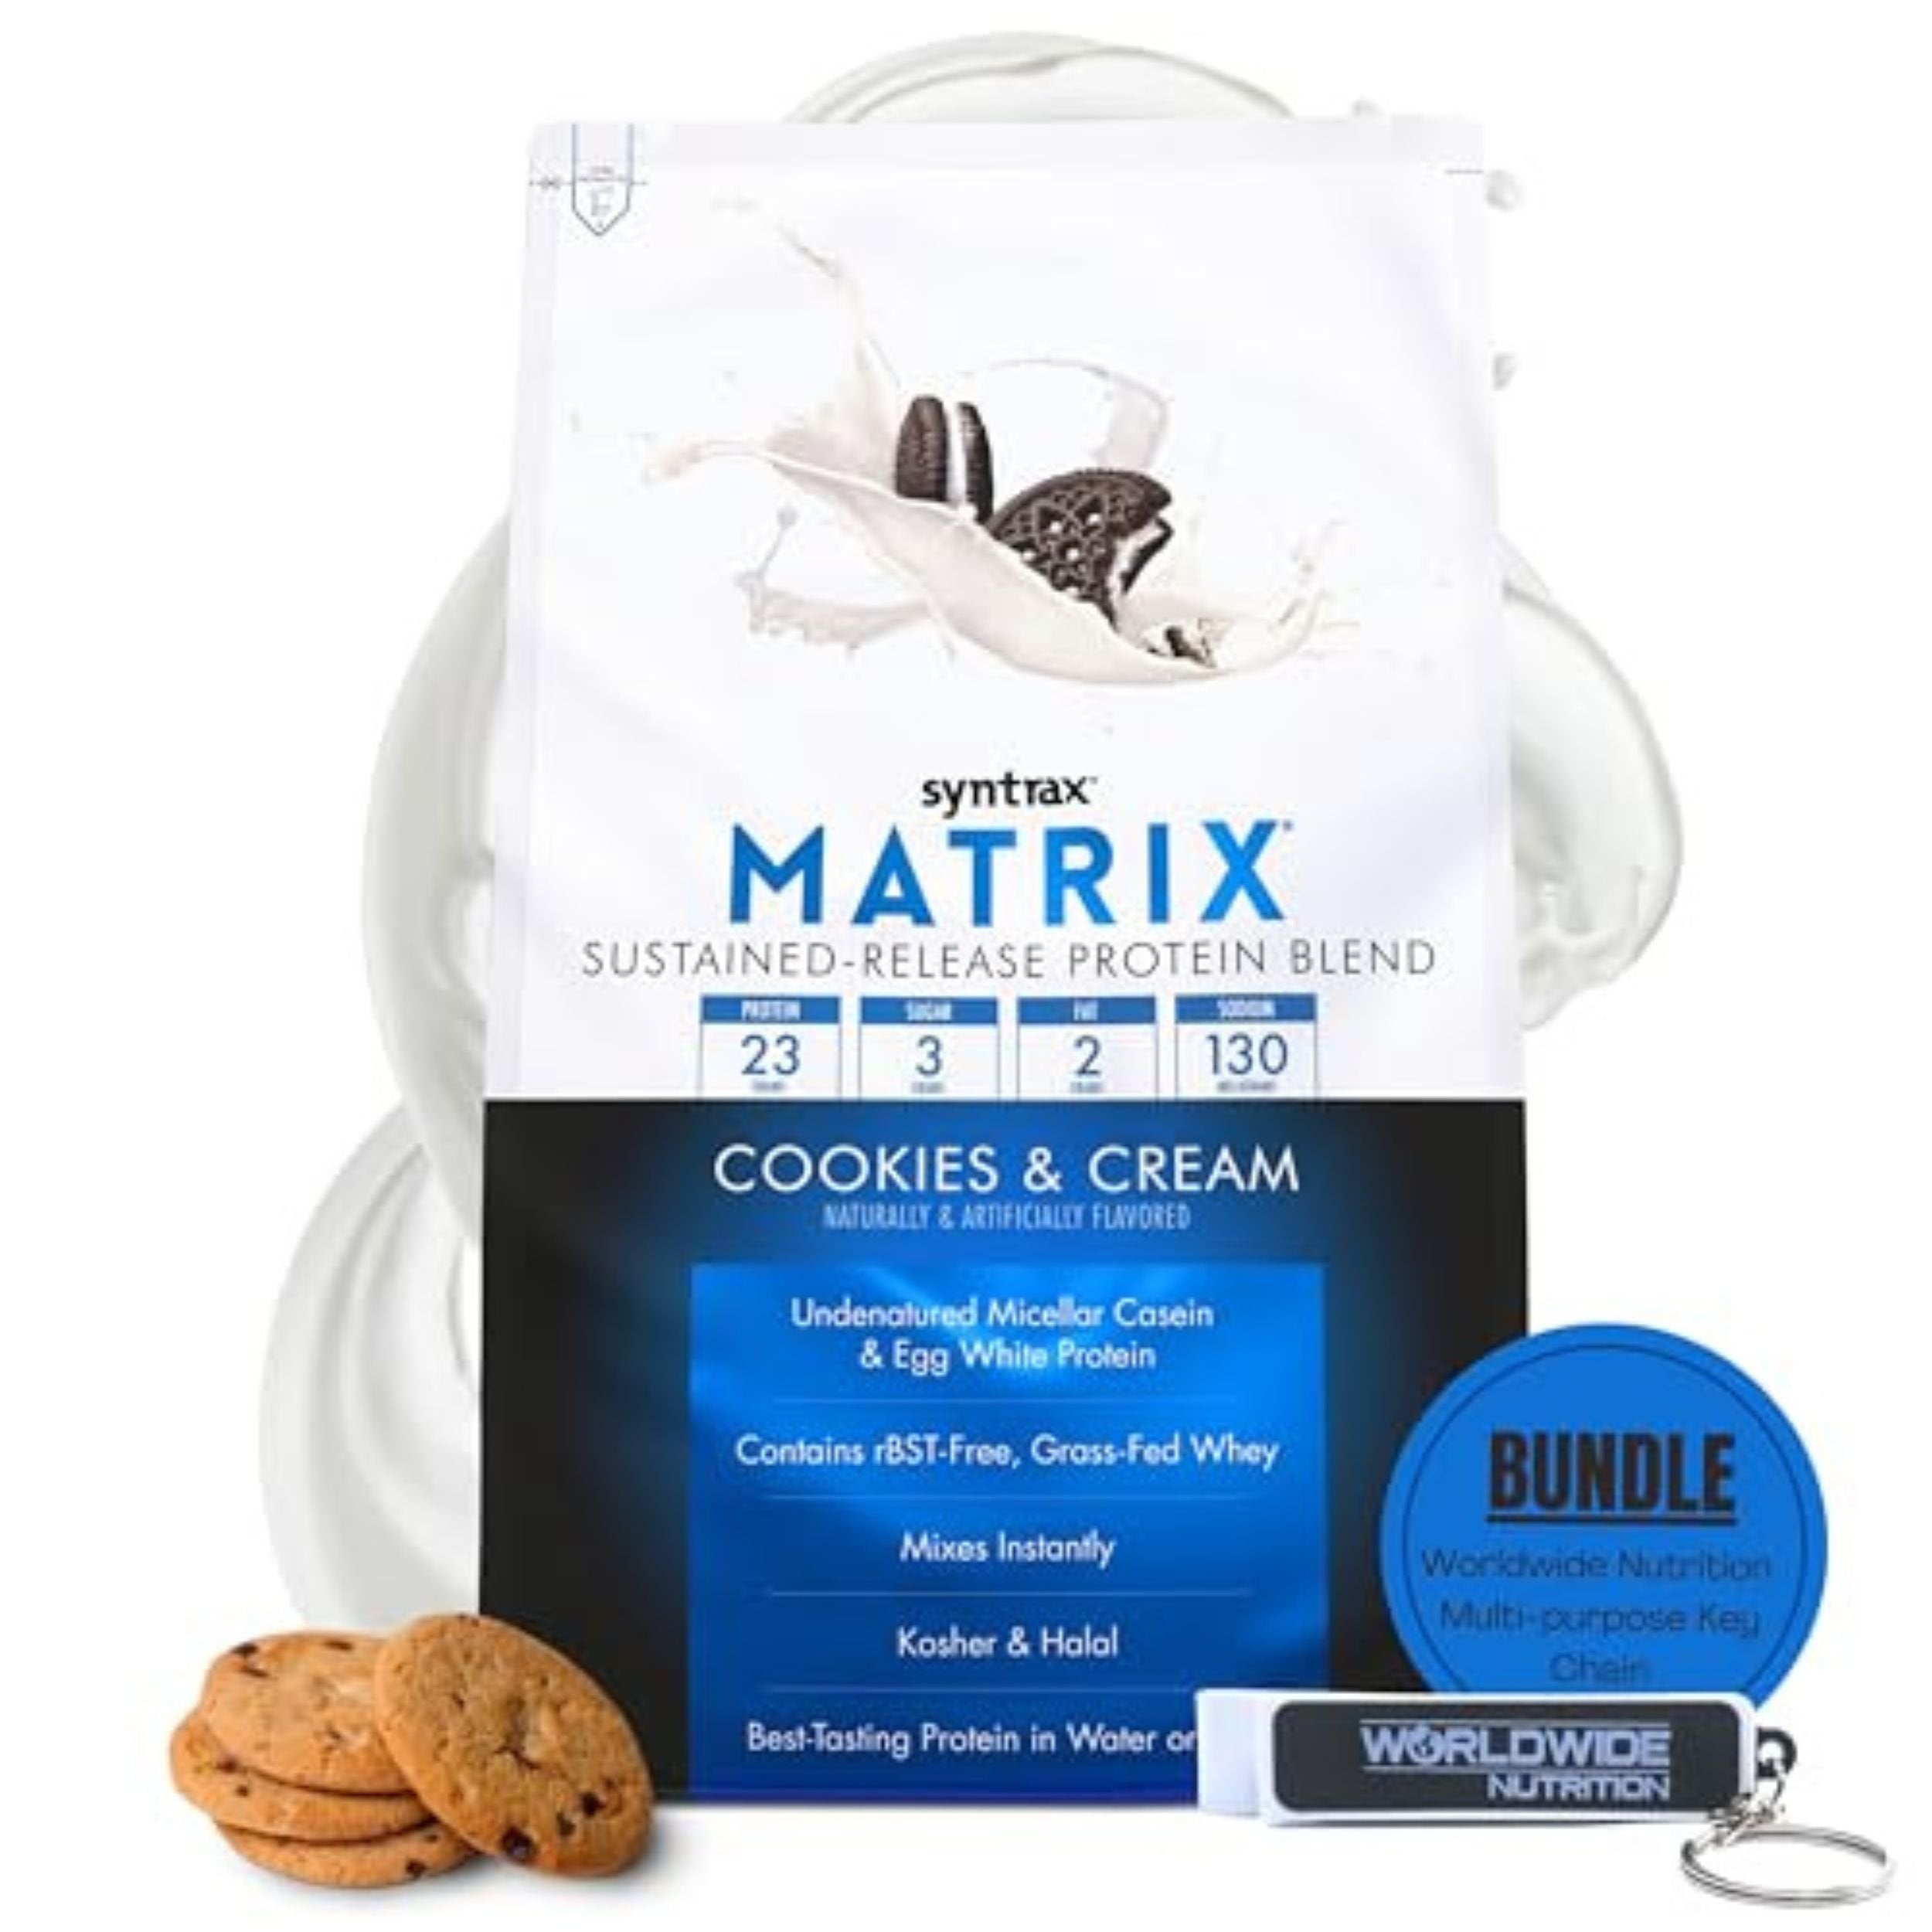 Syntrax Bundle: Matrix Protein Powder 2.0 Sustained-Release Whey Protein Powder Blend - Instant Mix Protein Powder Cookies and Cream, 2 Pounds with Worldwide Nutrition Keychain